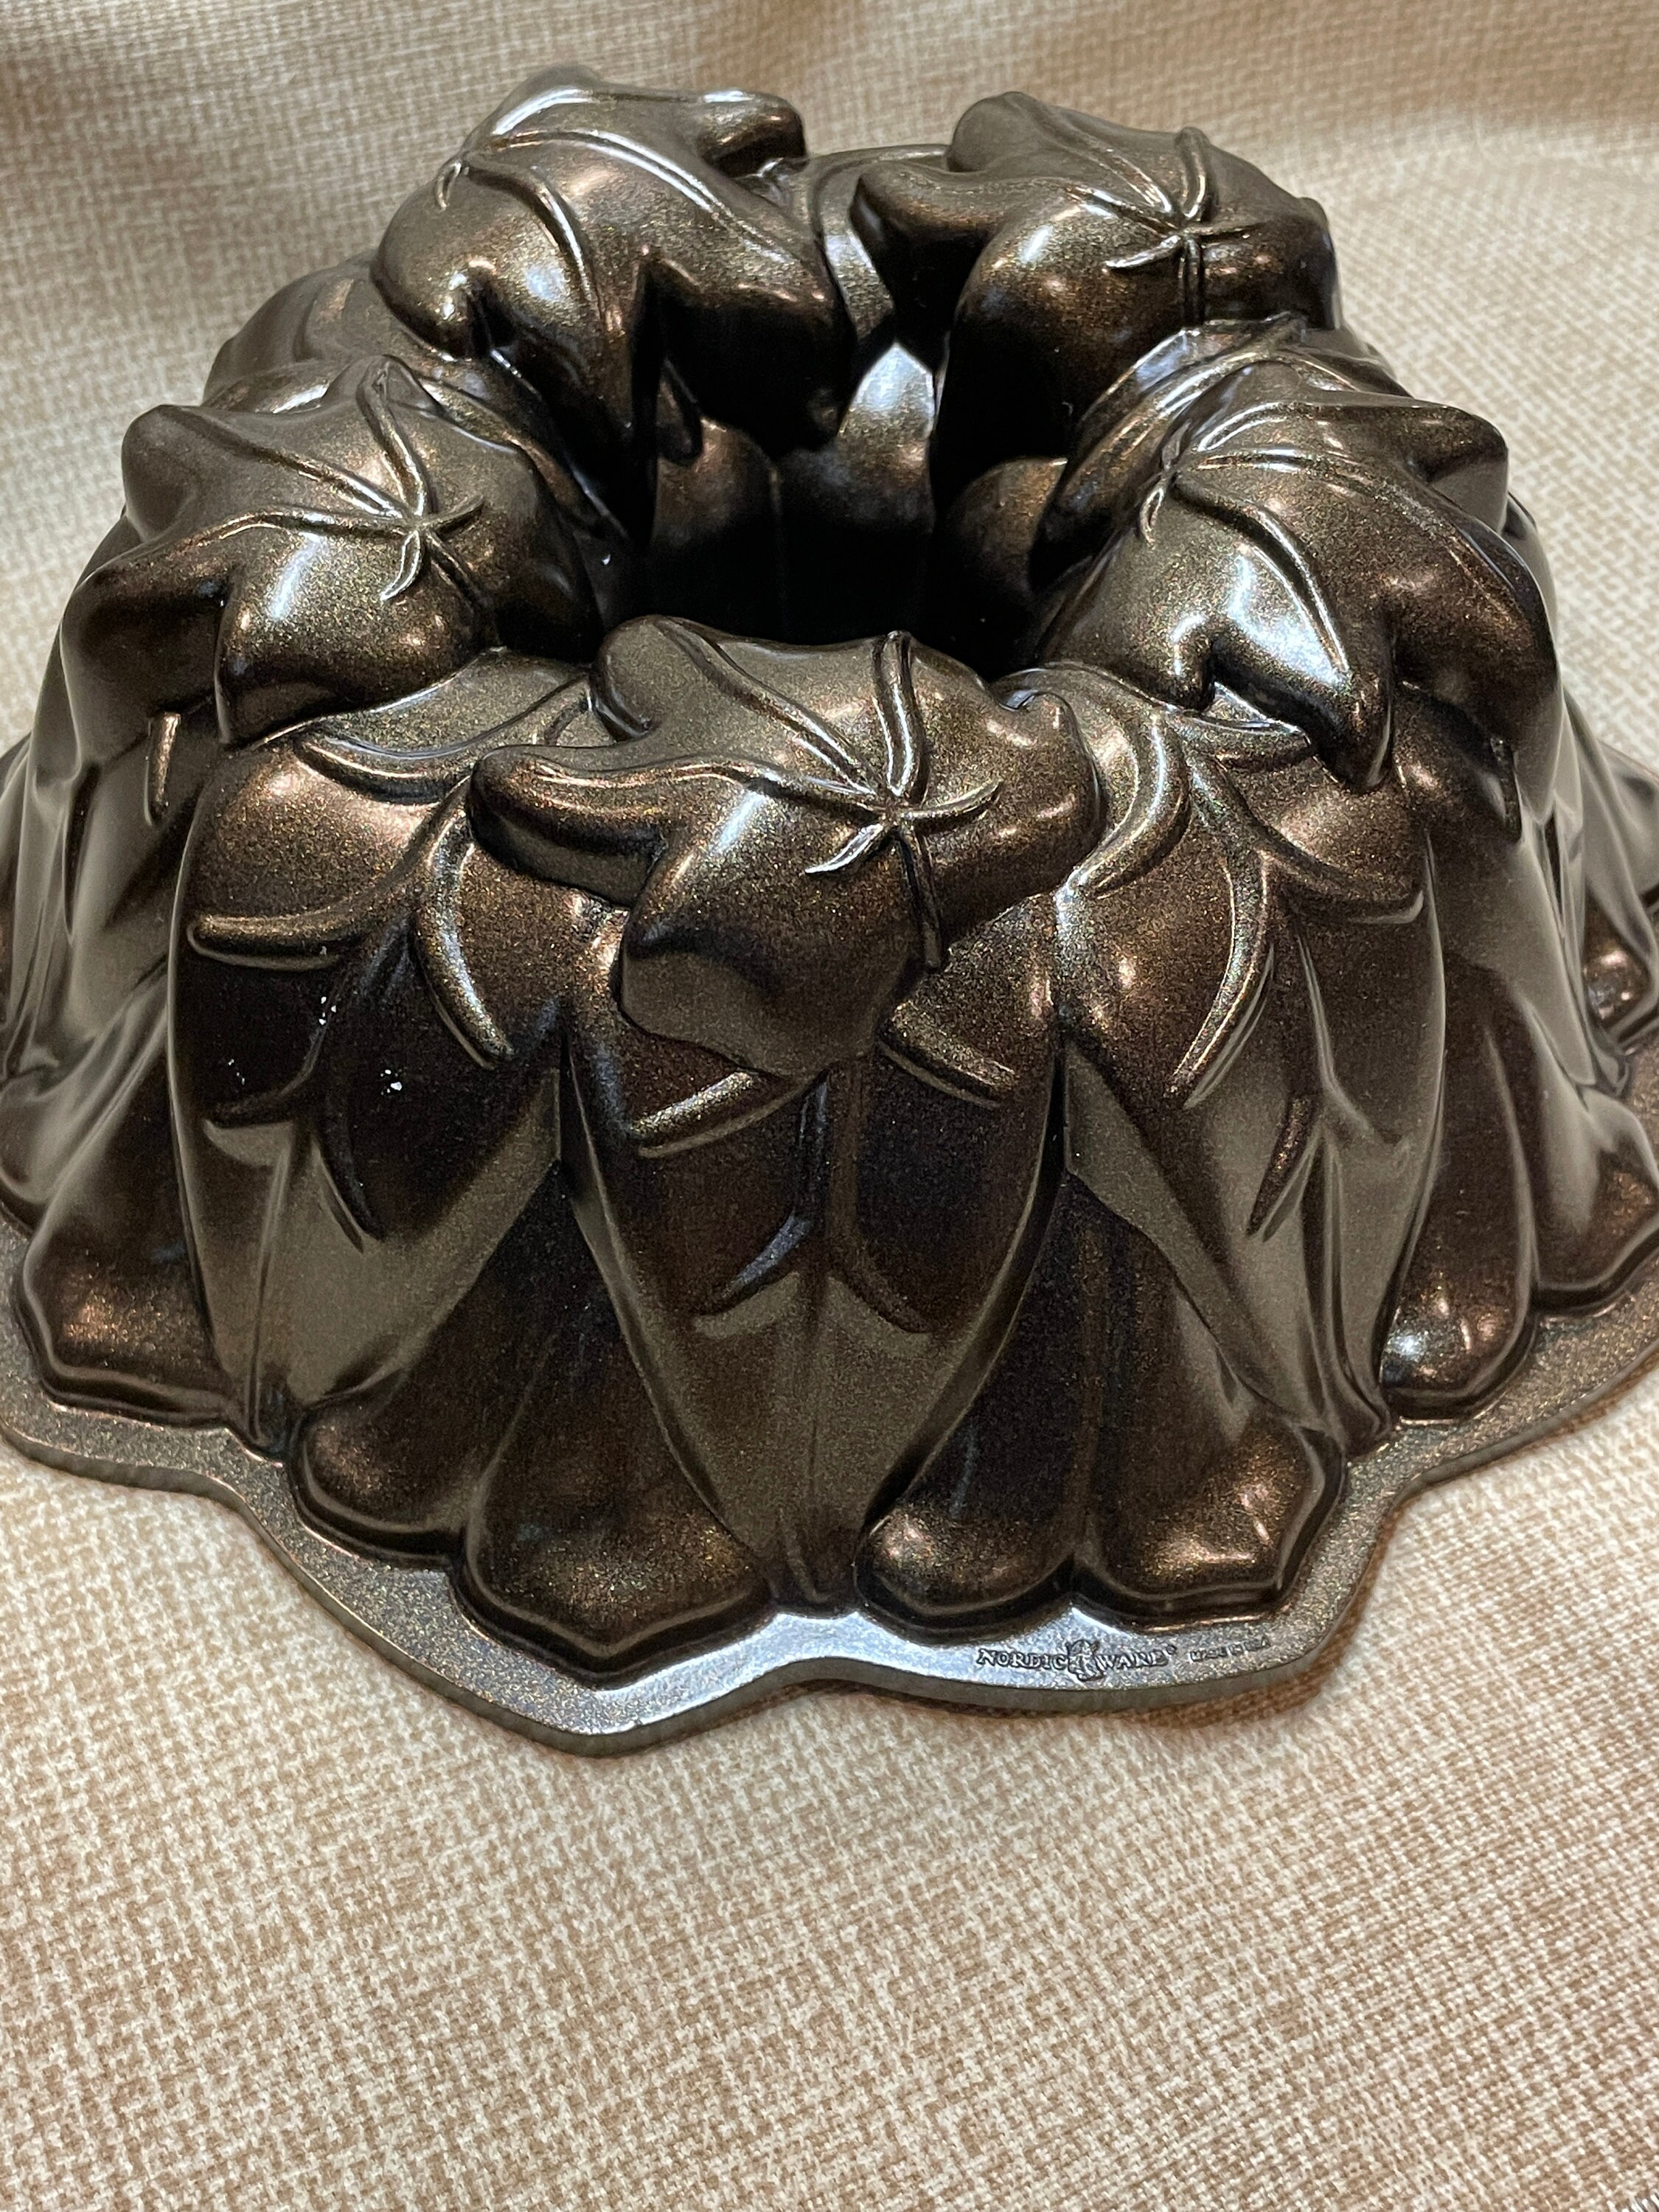 Nordic Ware USA Fall Harvest Bundt Cake Pan Size 10 Cups USA Made Leaves  Acorns